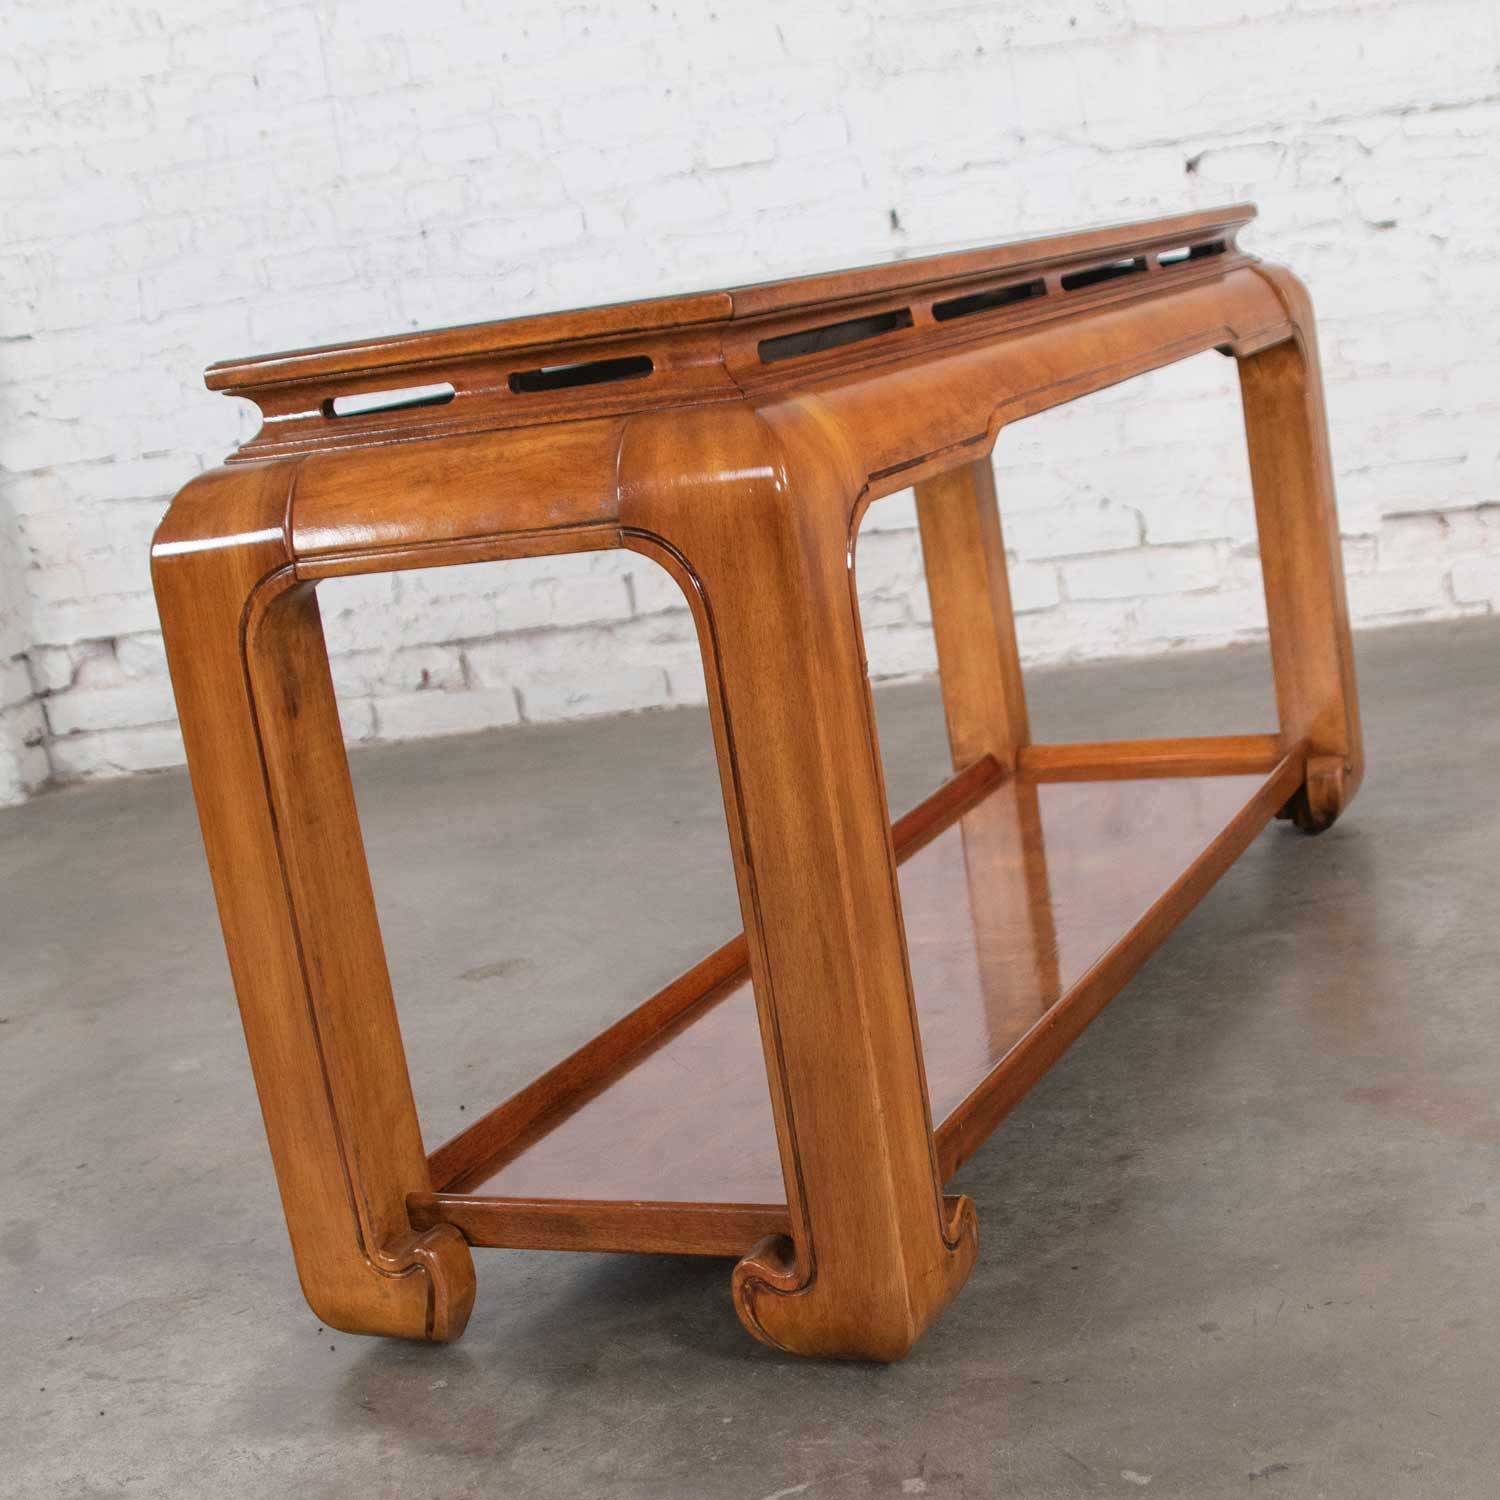 Chinoiserie Chow Leg Ming Style Sofa Console Table Attributed to Schnadig Intl. Furniture